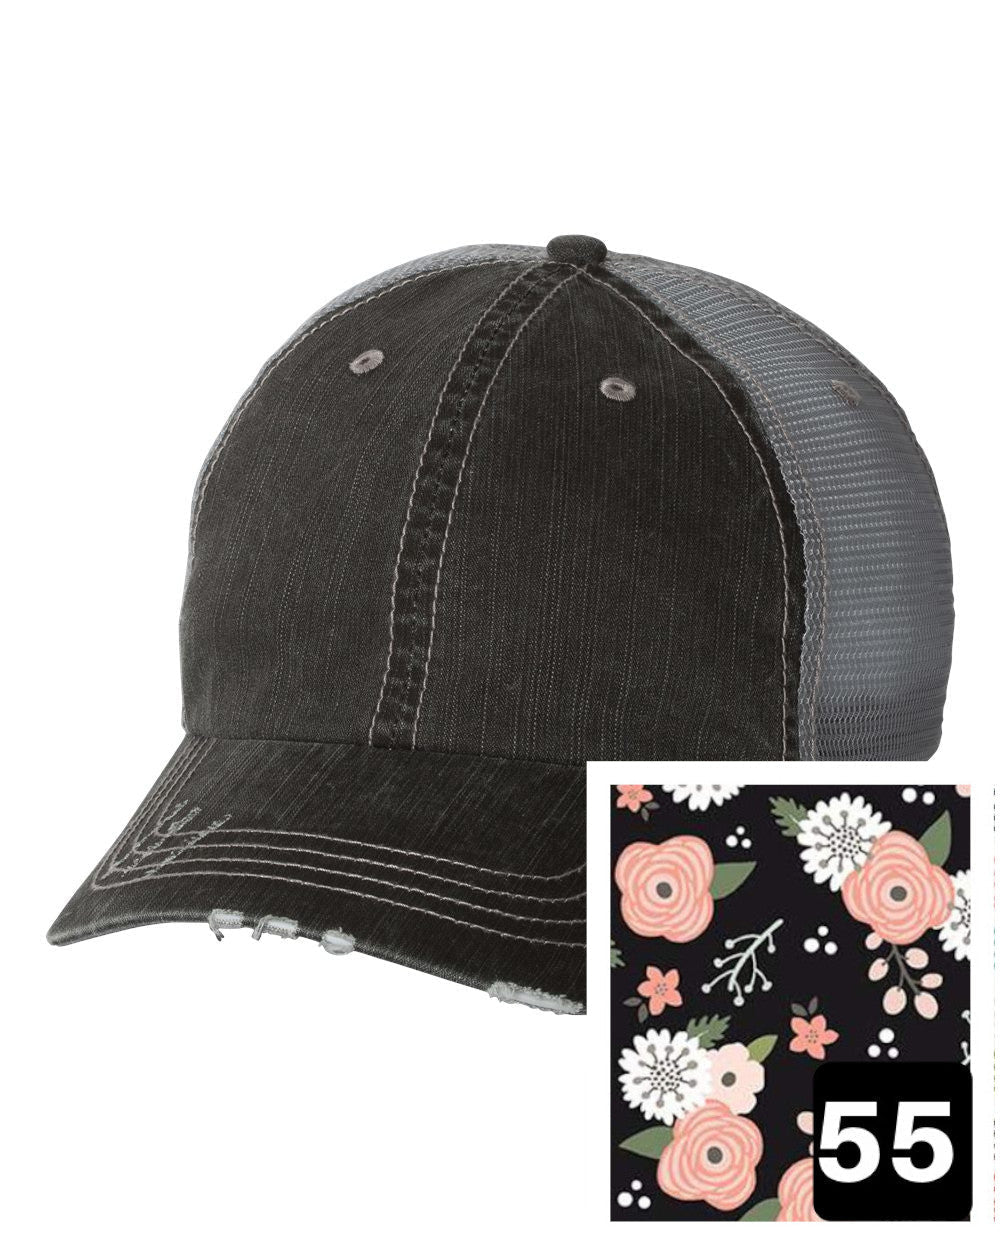 gray distressed trucker hat with petite floral on navy fabric state of Pennsylvania